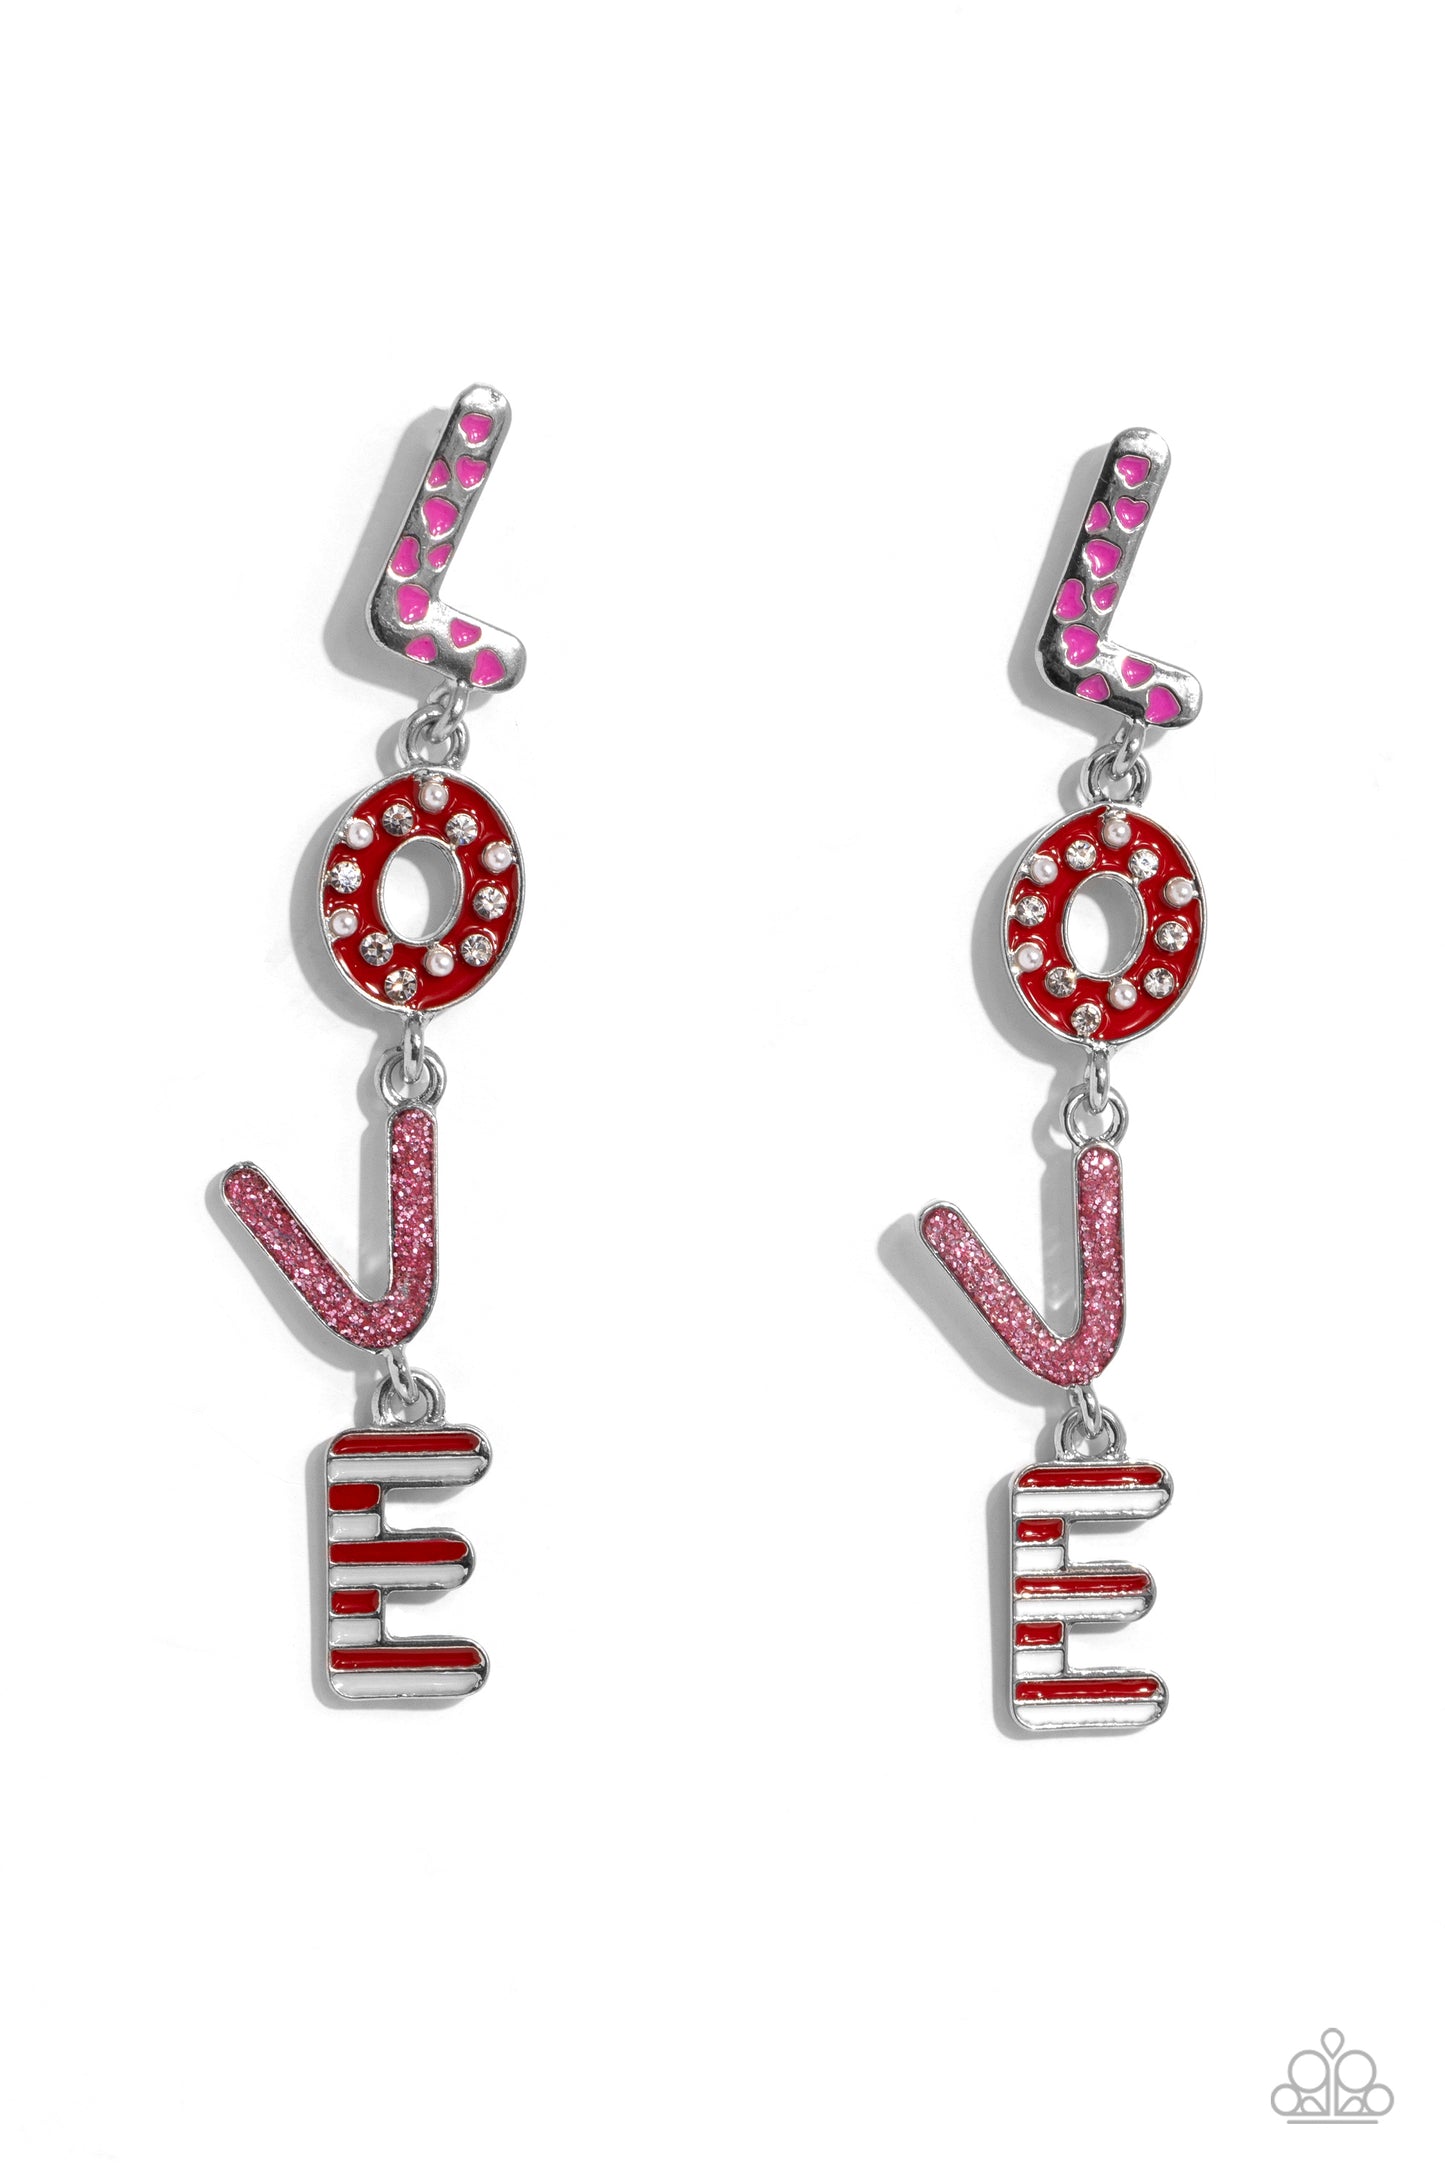 Admirable Assortment Pink Love Post Earring - Paparazzi Accessories Silver letters with various Valentine's-inspired details spell out the word "LOVE" as they vertically cascade down the ear in a flattering finish. SKU: P5PO-PKXX-112S 